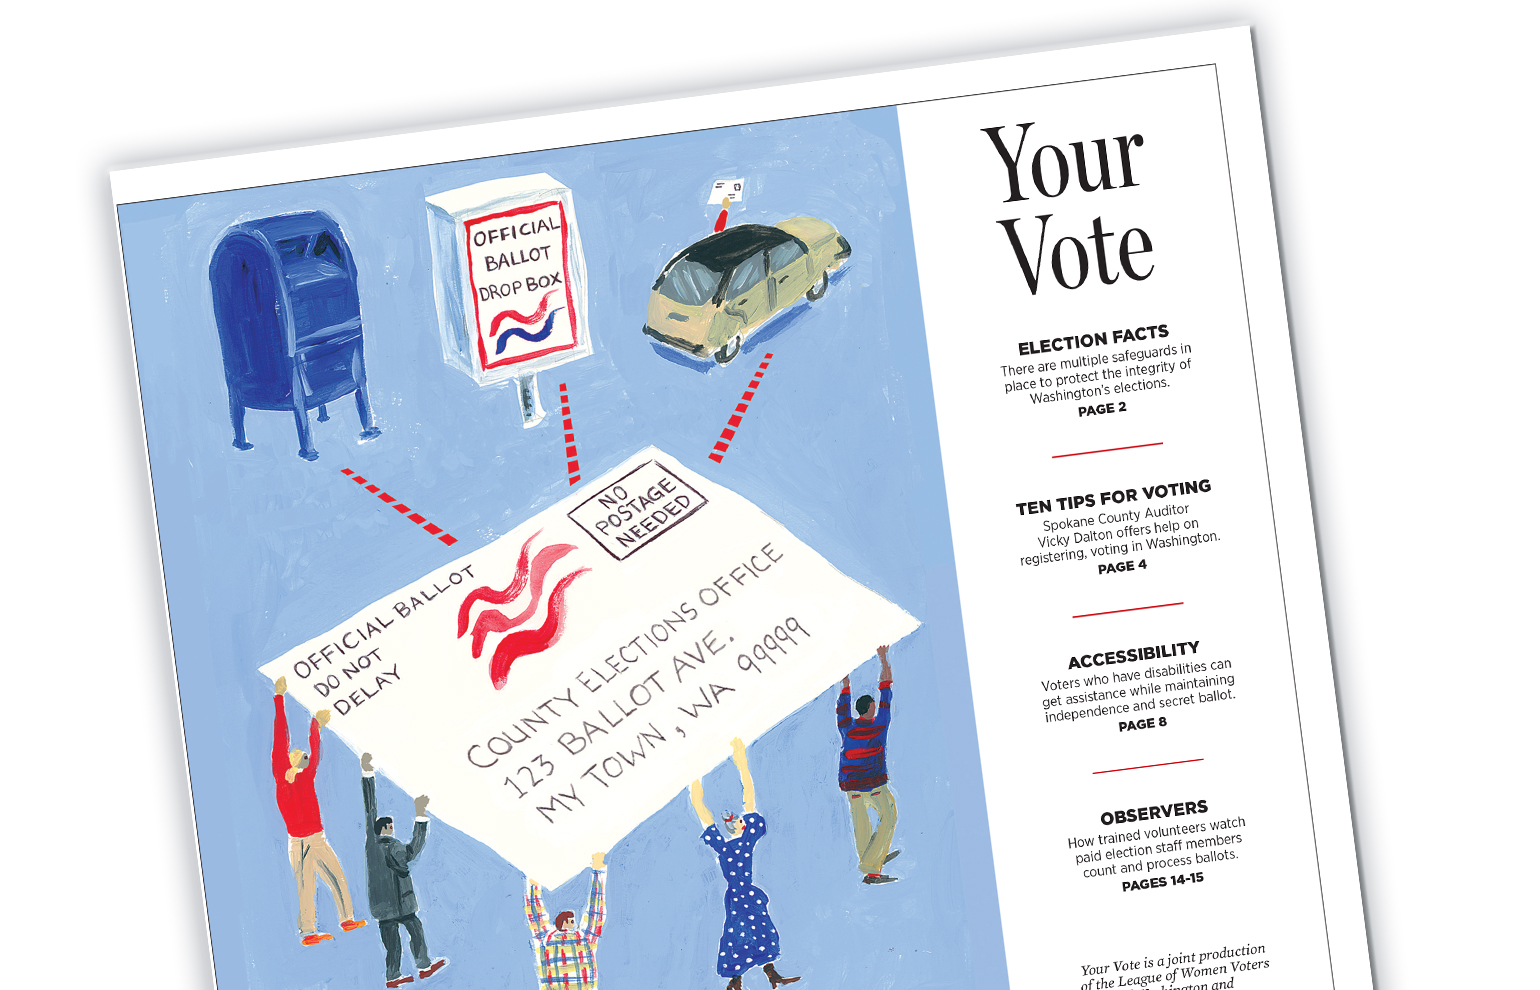 "Your Vote" from The Spokesman-Review and the League of Women Voters  of Washington